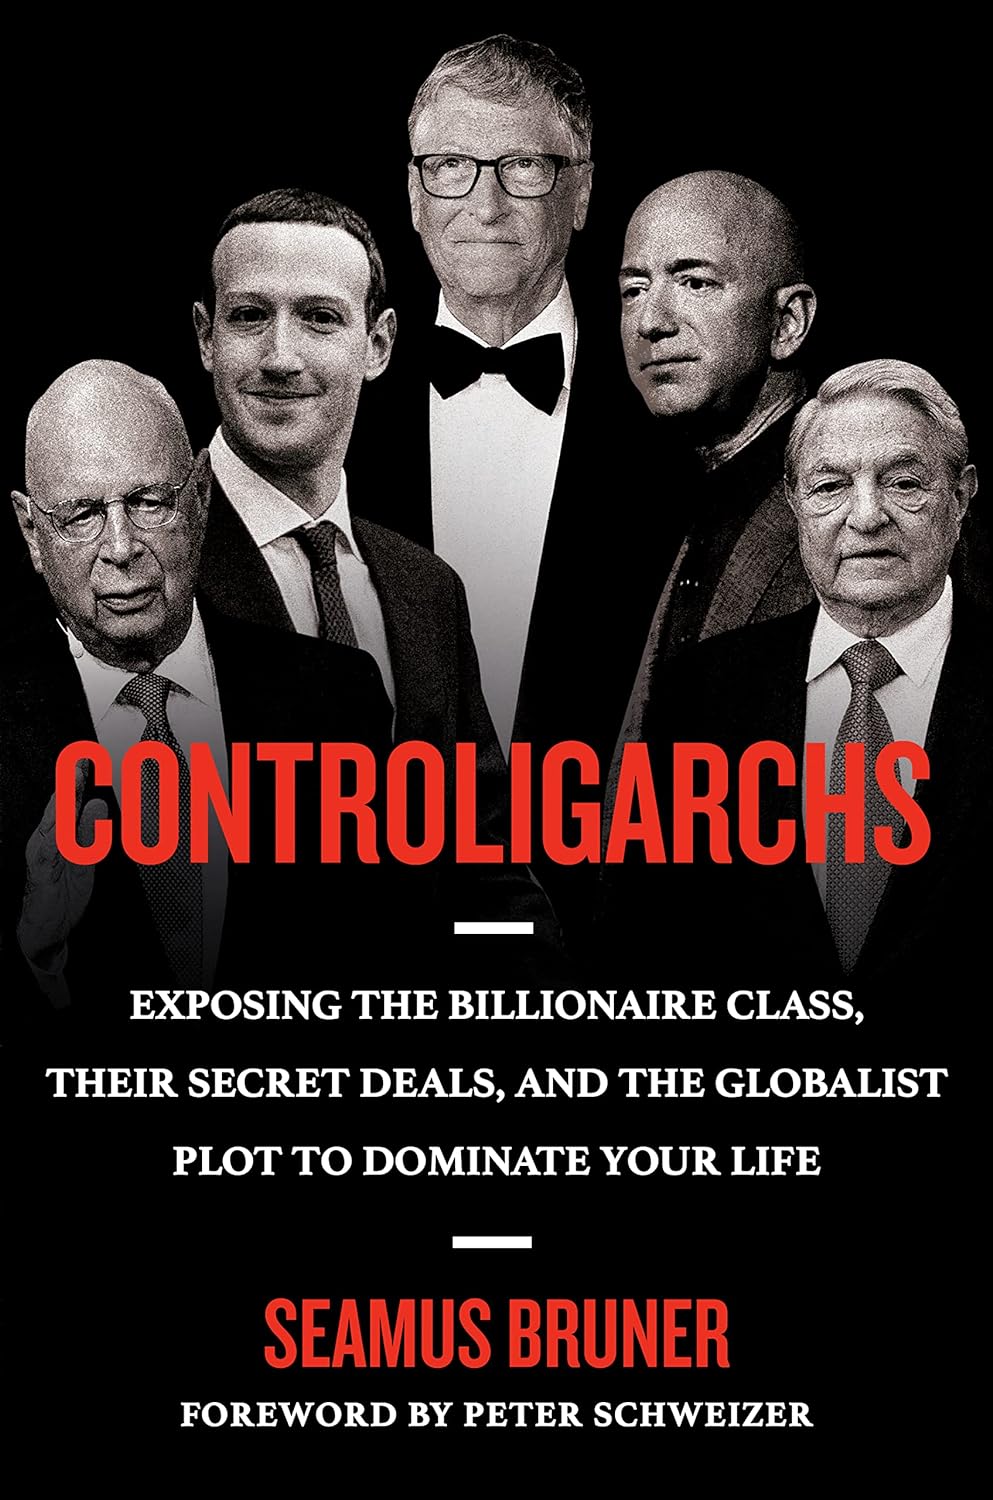 Controligarchs Exposing the Billionaire Class, Their Secret Deals, and the Globalist Plot to Dominate Your Life - SureShot Books Publishing LLC